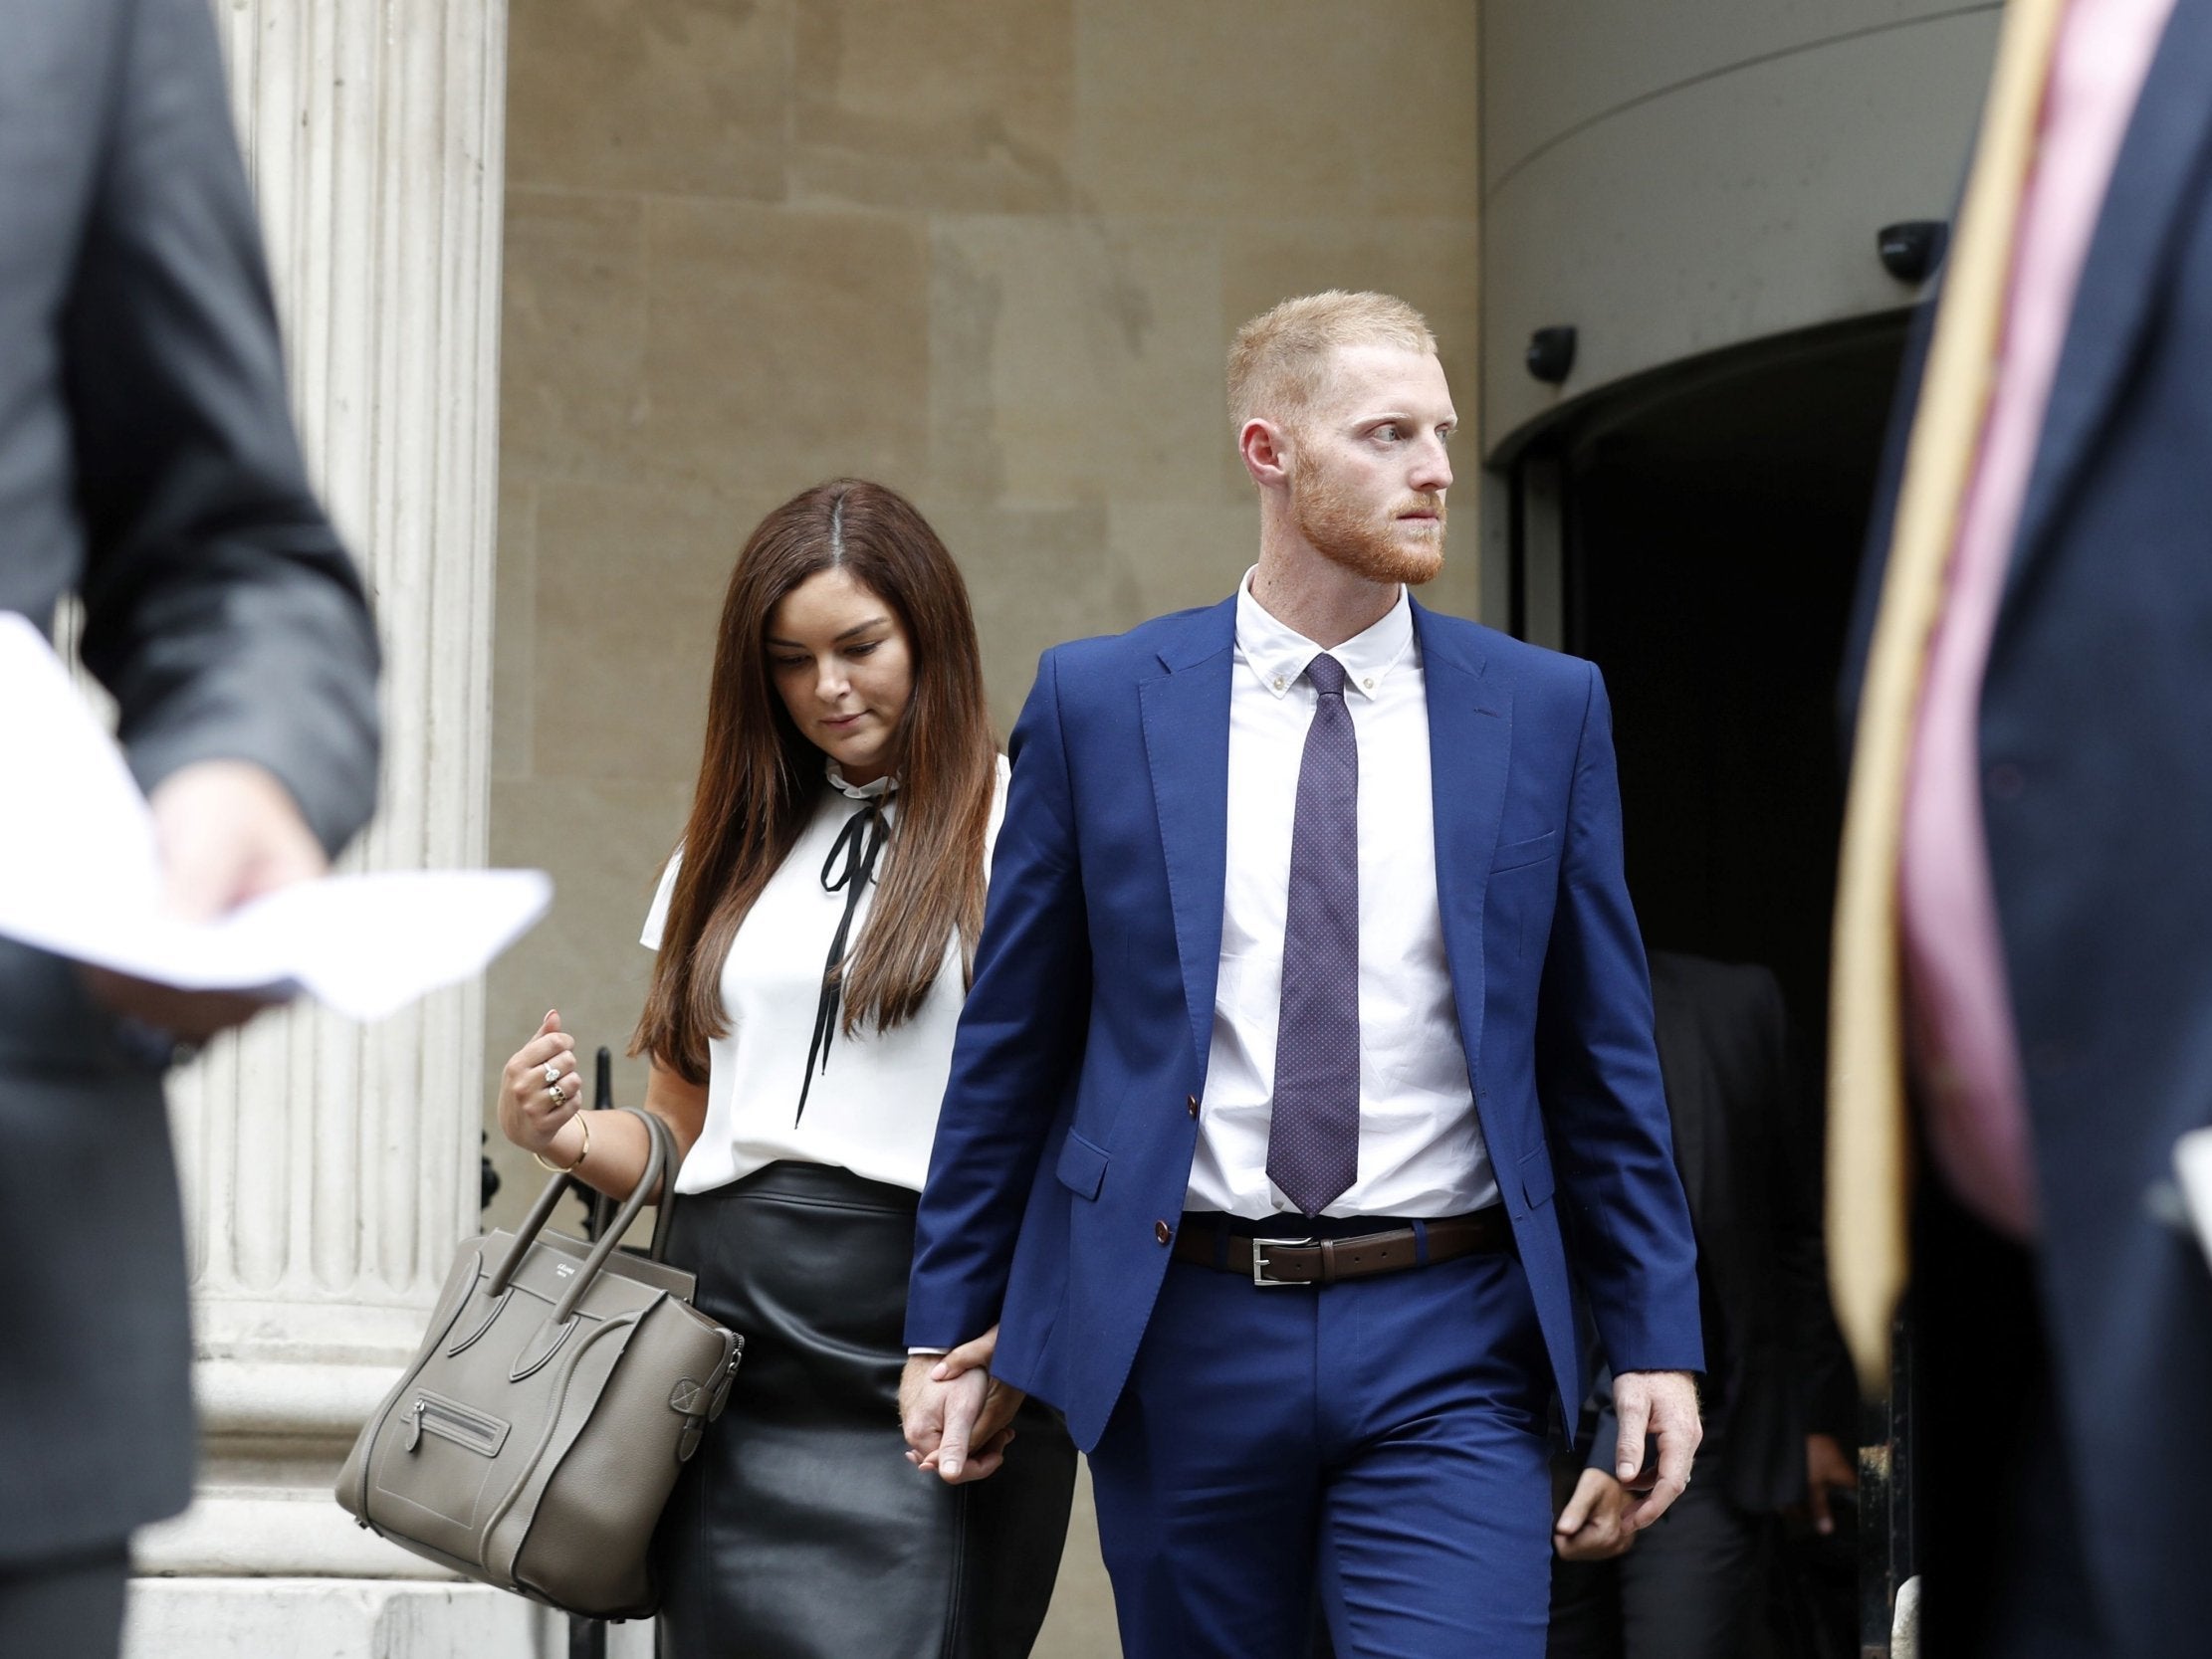 Stokes walked free after being found not guilty of affray